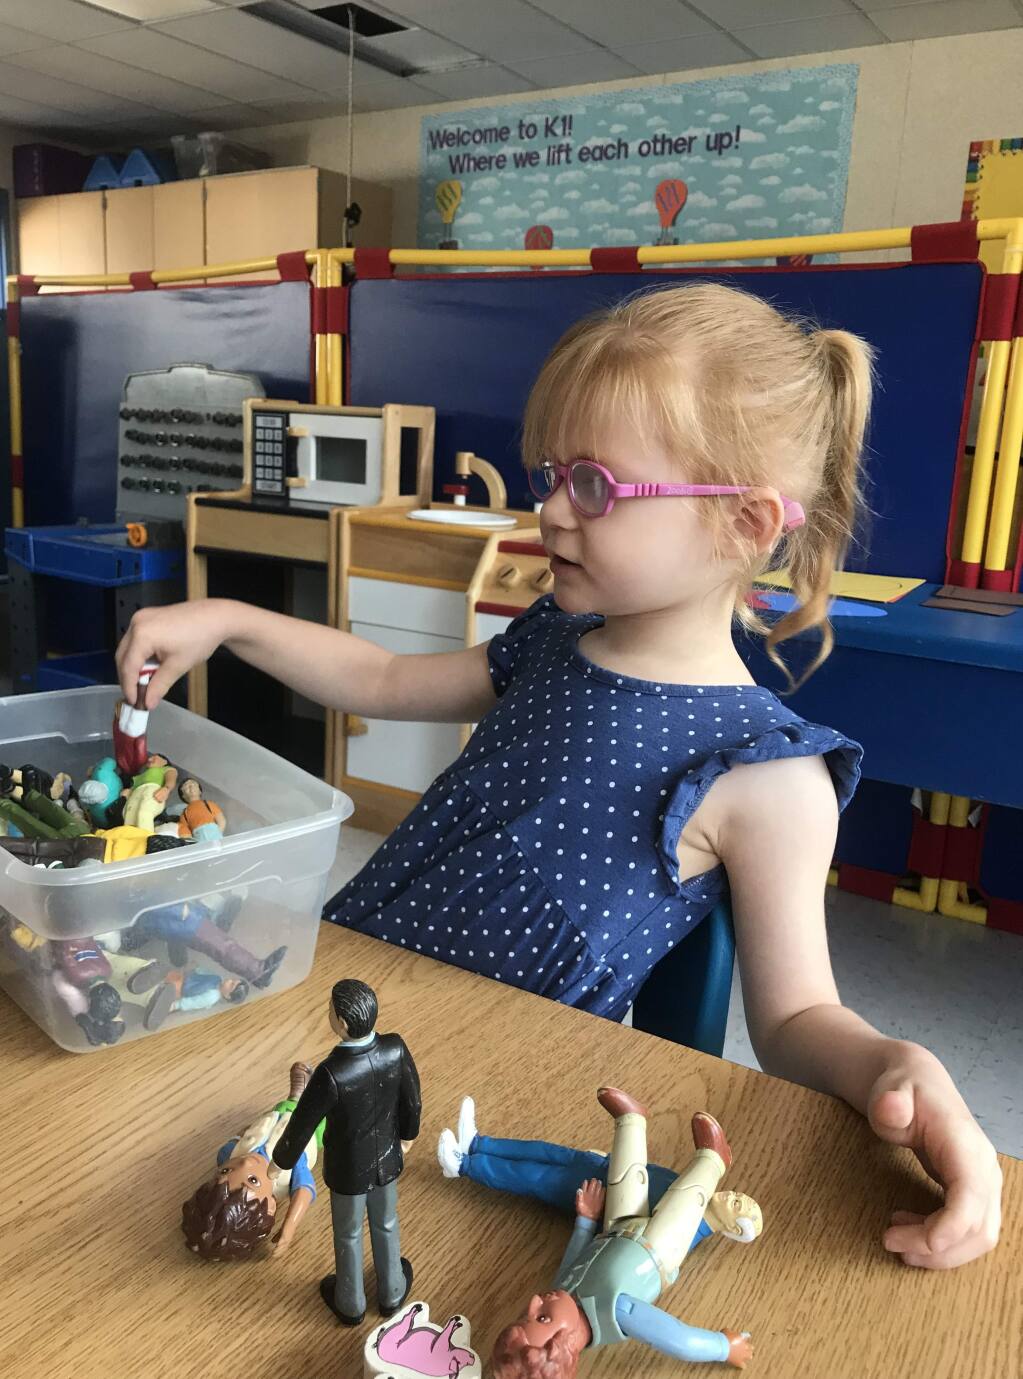 Brooke Adams during her first day of kindergarten at Village Elementary School in Santa Rosa on Monday, Aug. 13, 2018. (COURTESY OF JANA ADAMS)